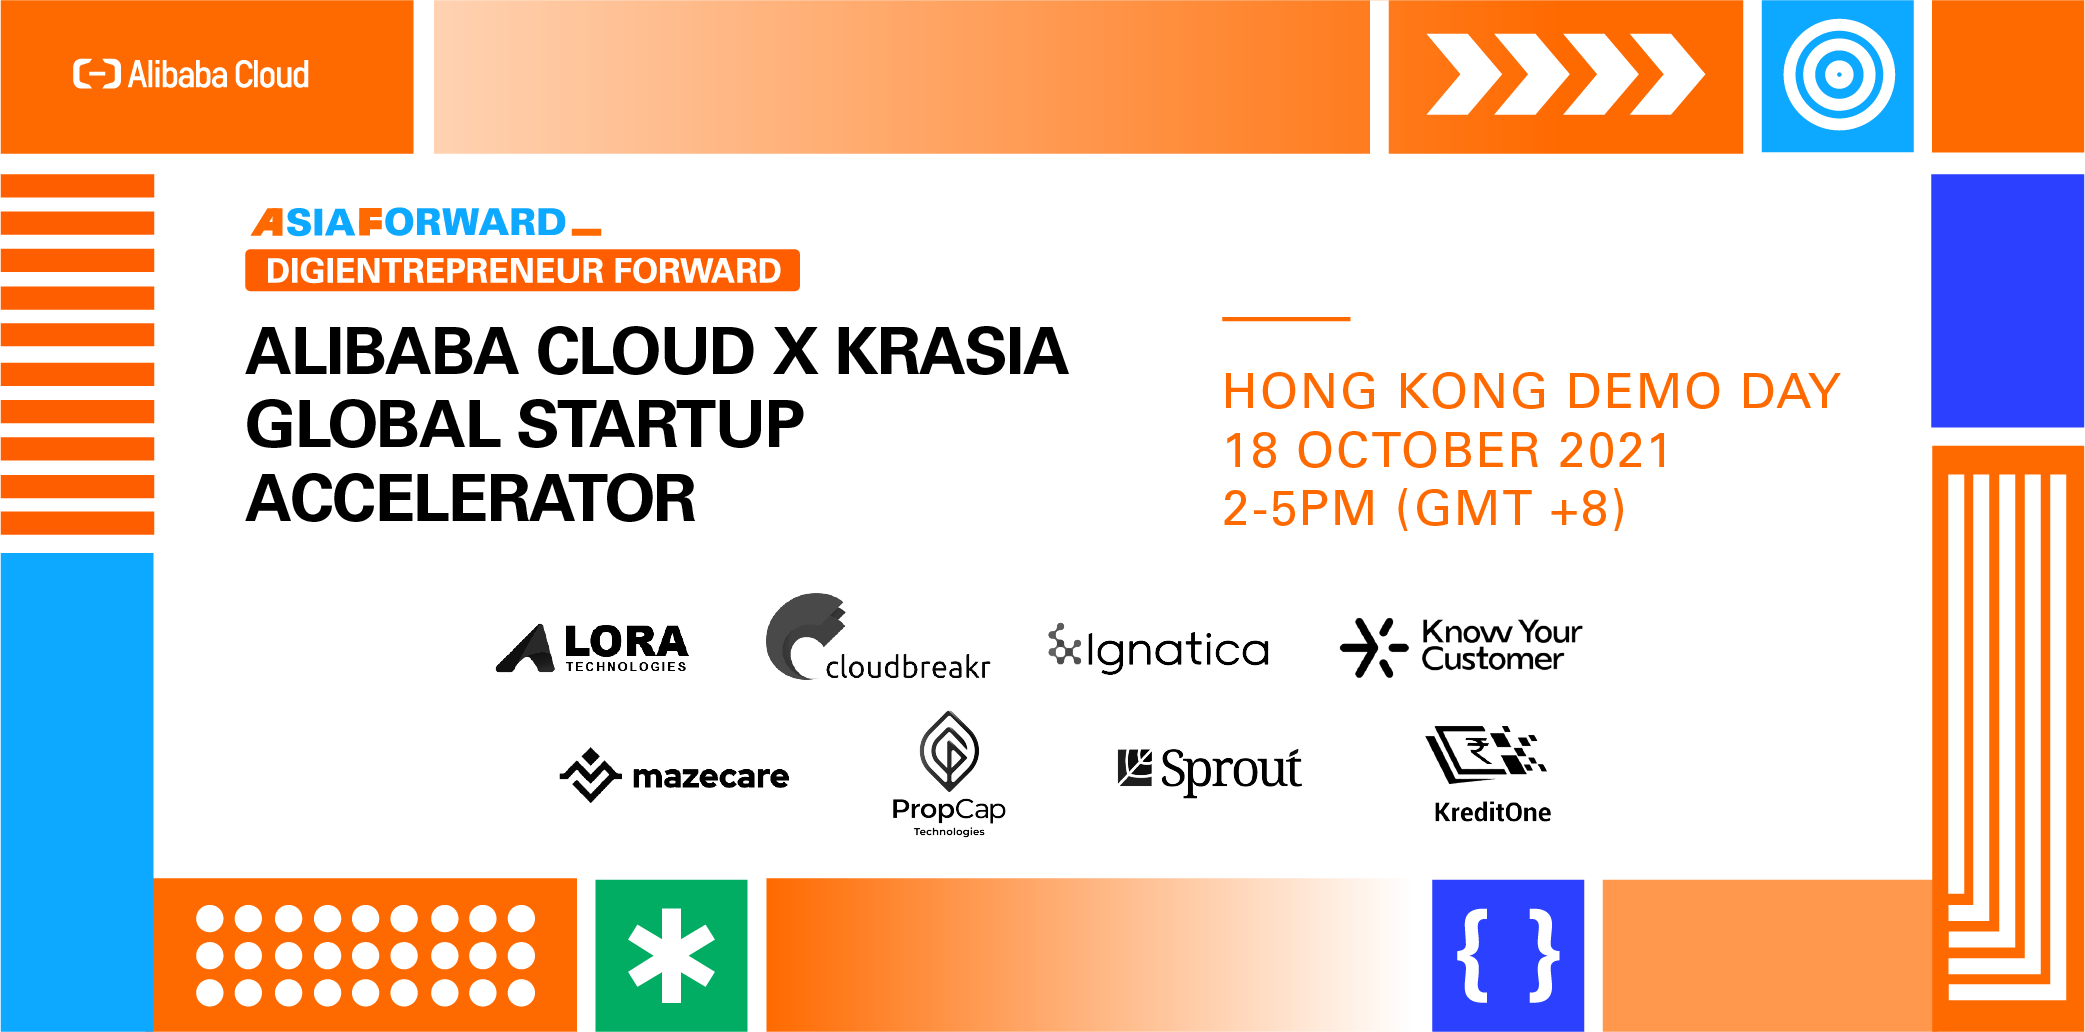 Alibaba Cloud x KrASIA Global Startup Accelerator announces finalists for Hong Kong Demo Day